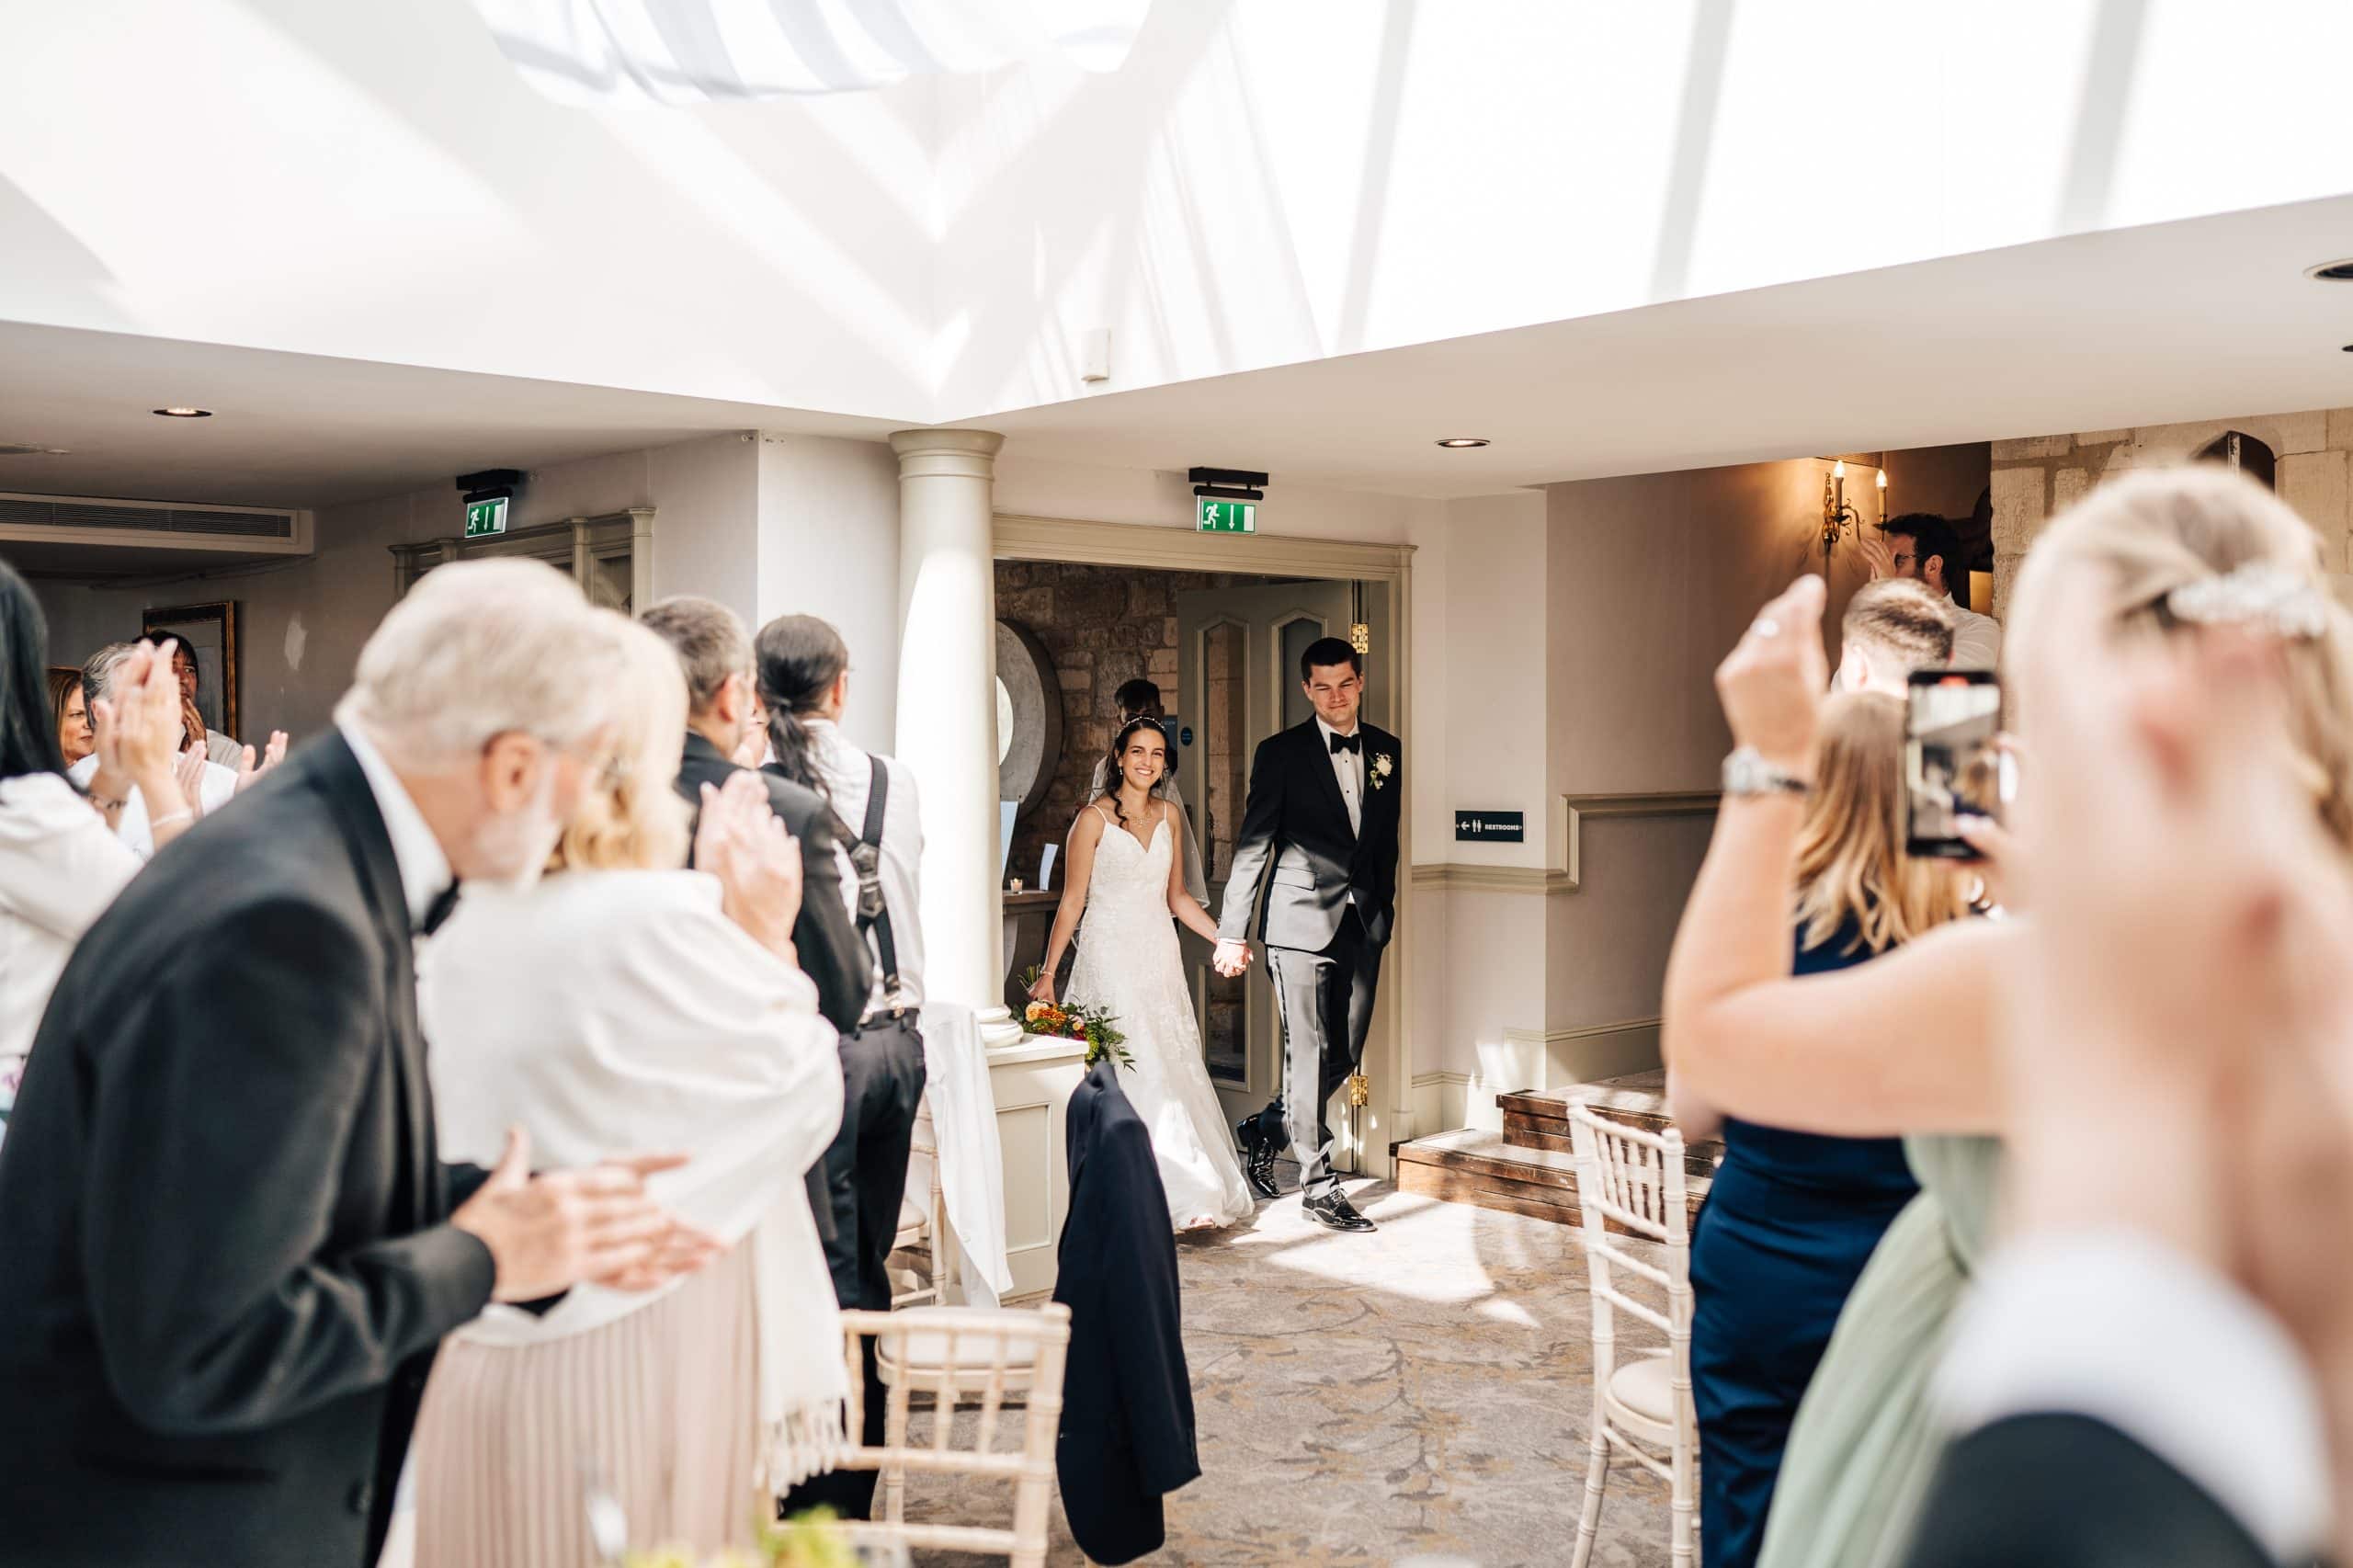 Wedding party at Ellenborough Park Hotel applaud the bride and groom as they enter their wedding reception